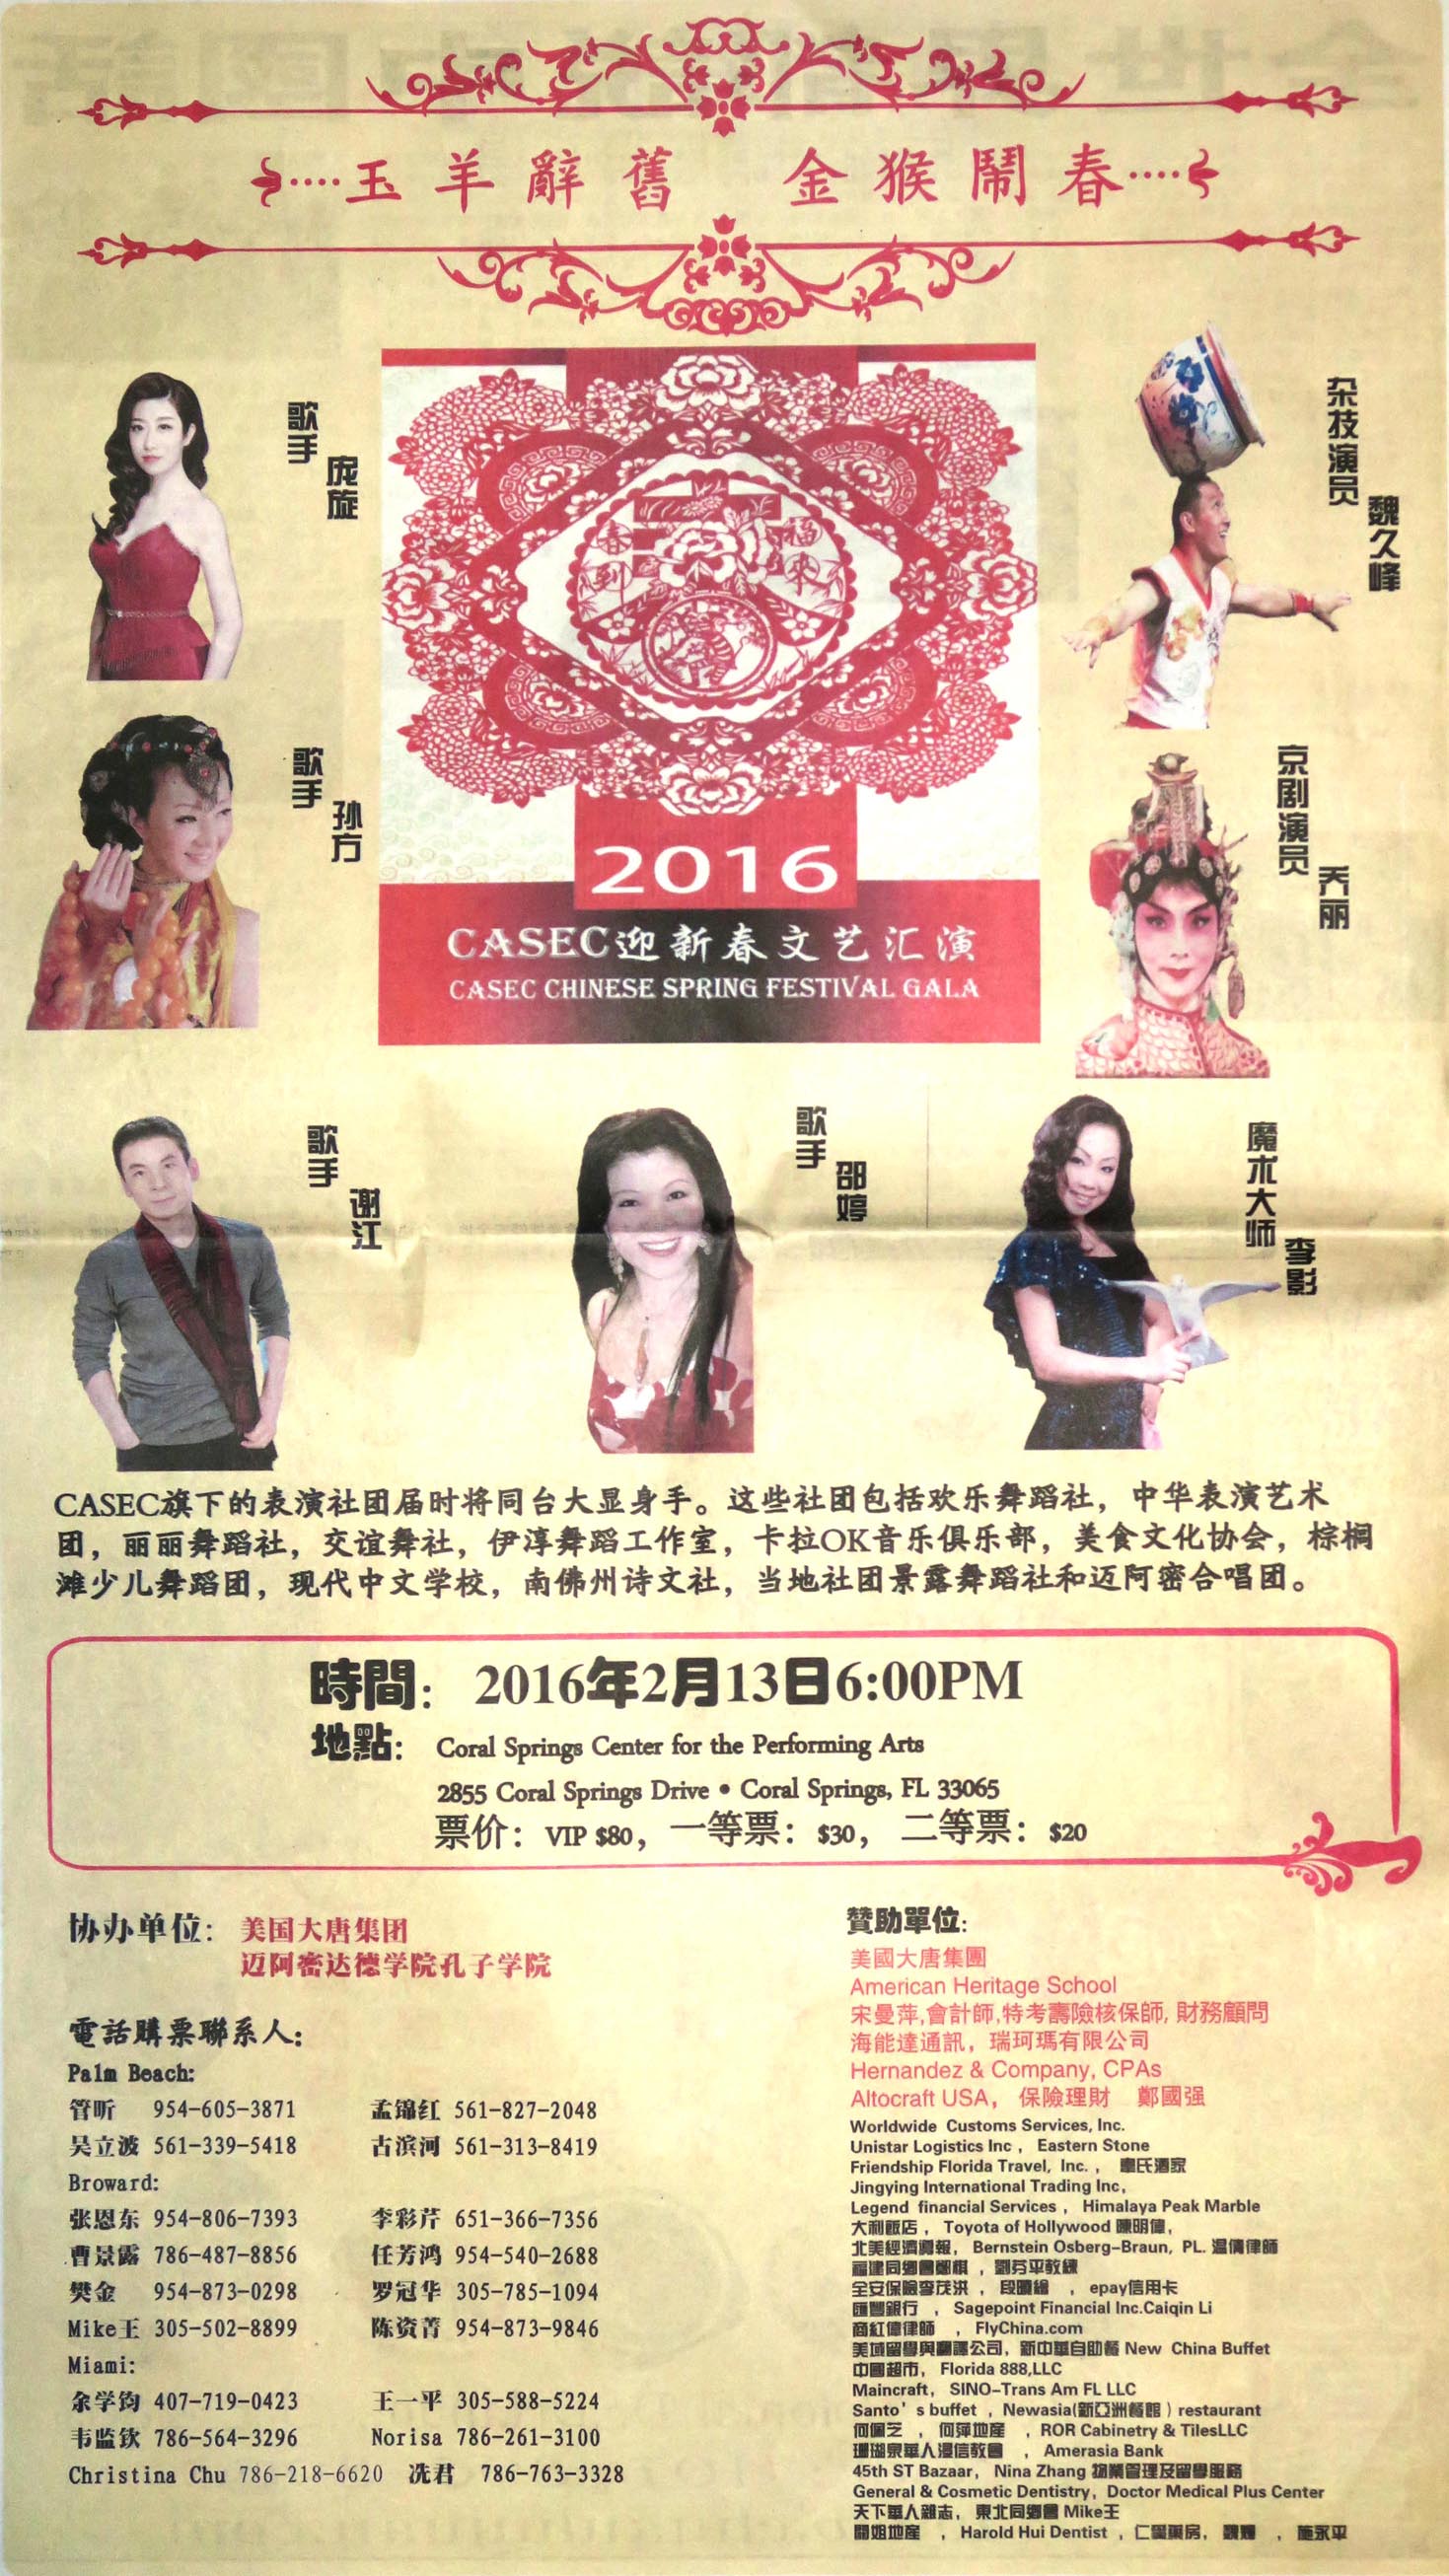 CASEC Chinese Spring Festival Gala